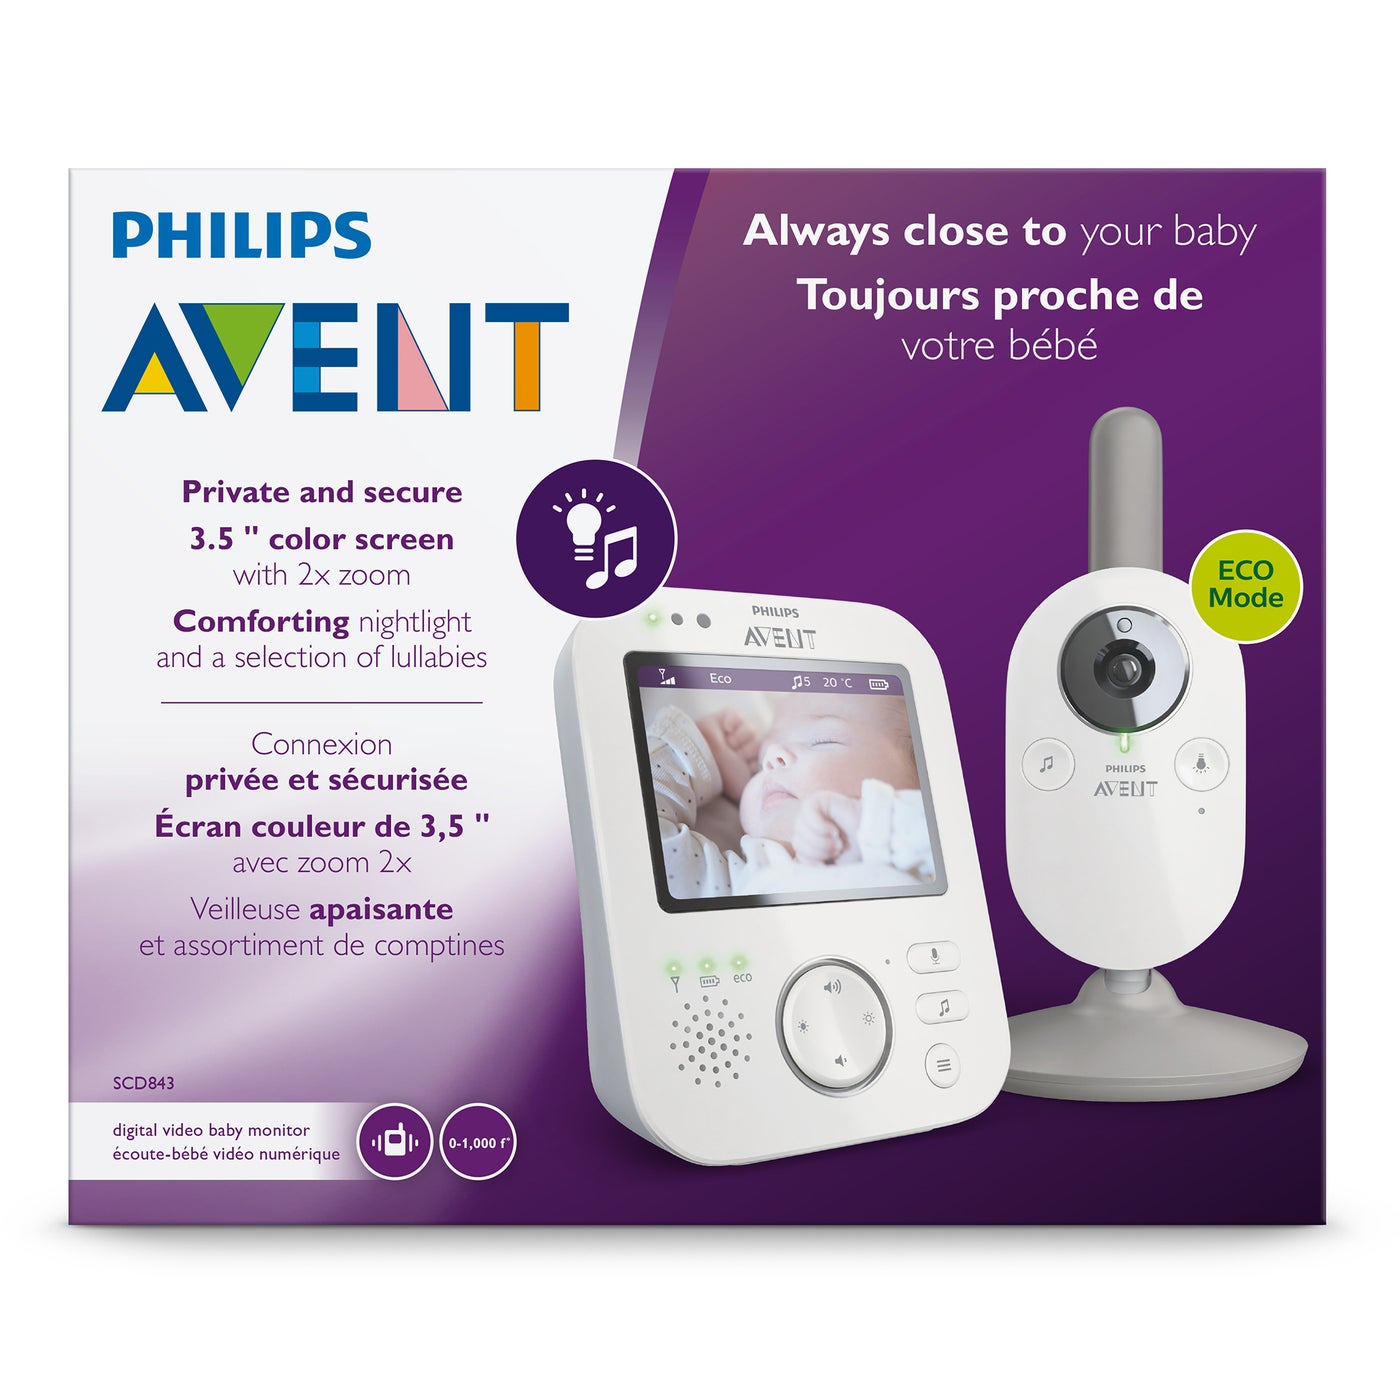 cheek Unpacking View the Internet Digital Video Baby Monitor - philips avent | Kidcentral Supply